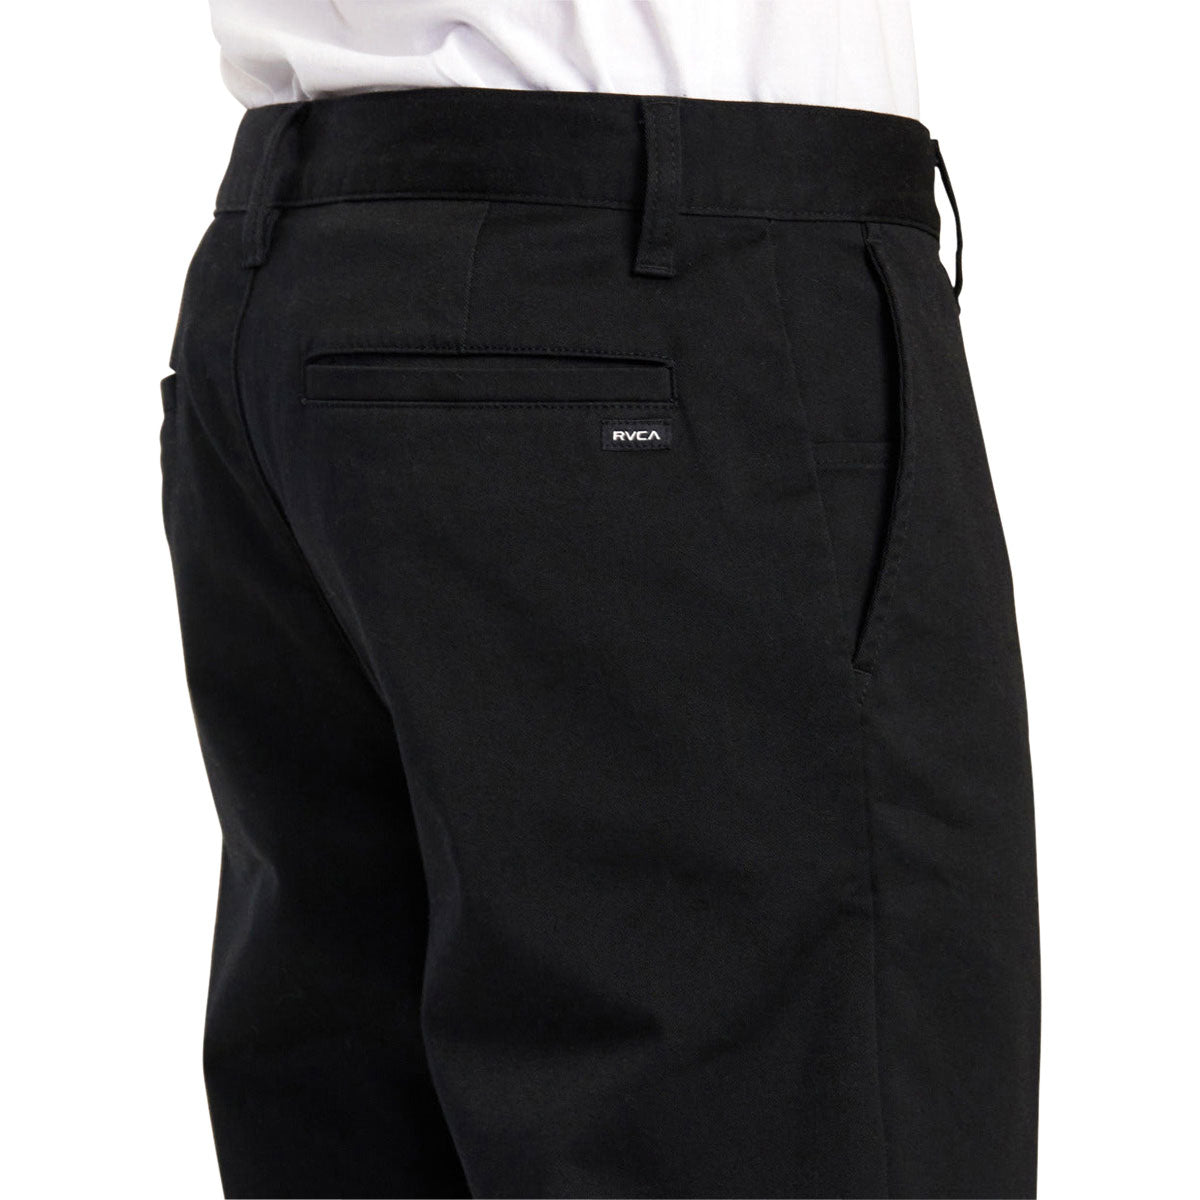 RVCA The Weekend Stretch Pants - New Black image 4